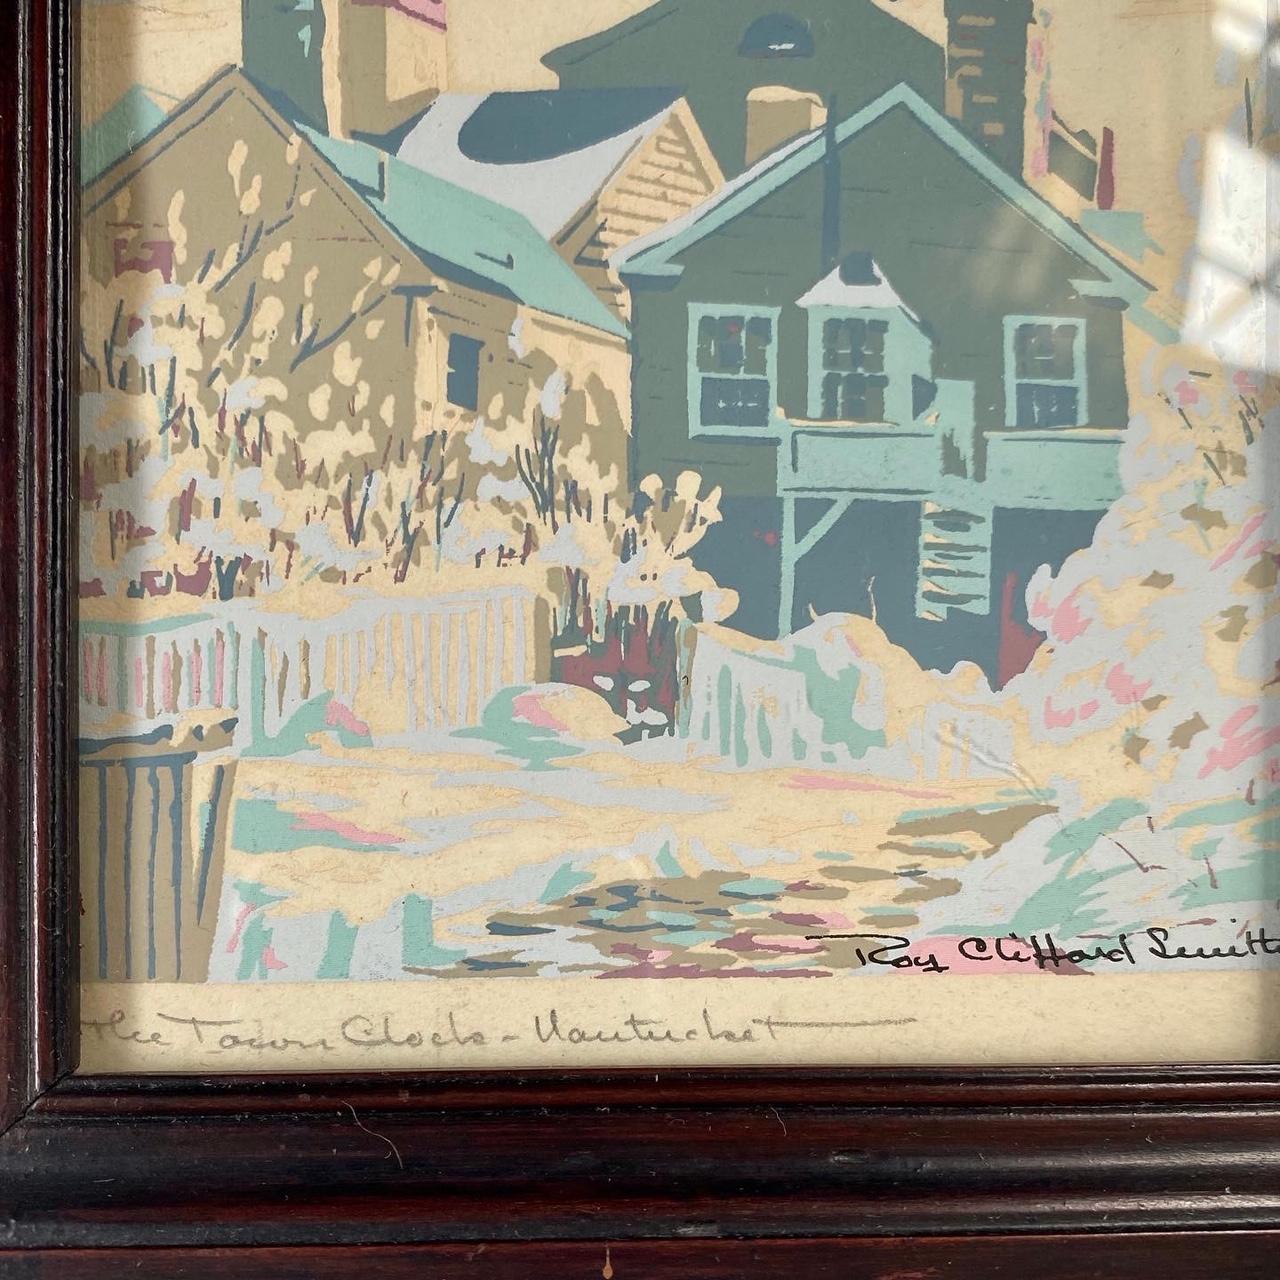 Vintage Nantucket Serigraph of The Town Clock Tower by Roy Clifford Smith, circa 1920s-1940s, a rare winter scene depicting the historic Unitarian Church on Orange Street, the South Church at the top of Stone Alley, with snow on roofs, fences,